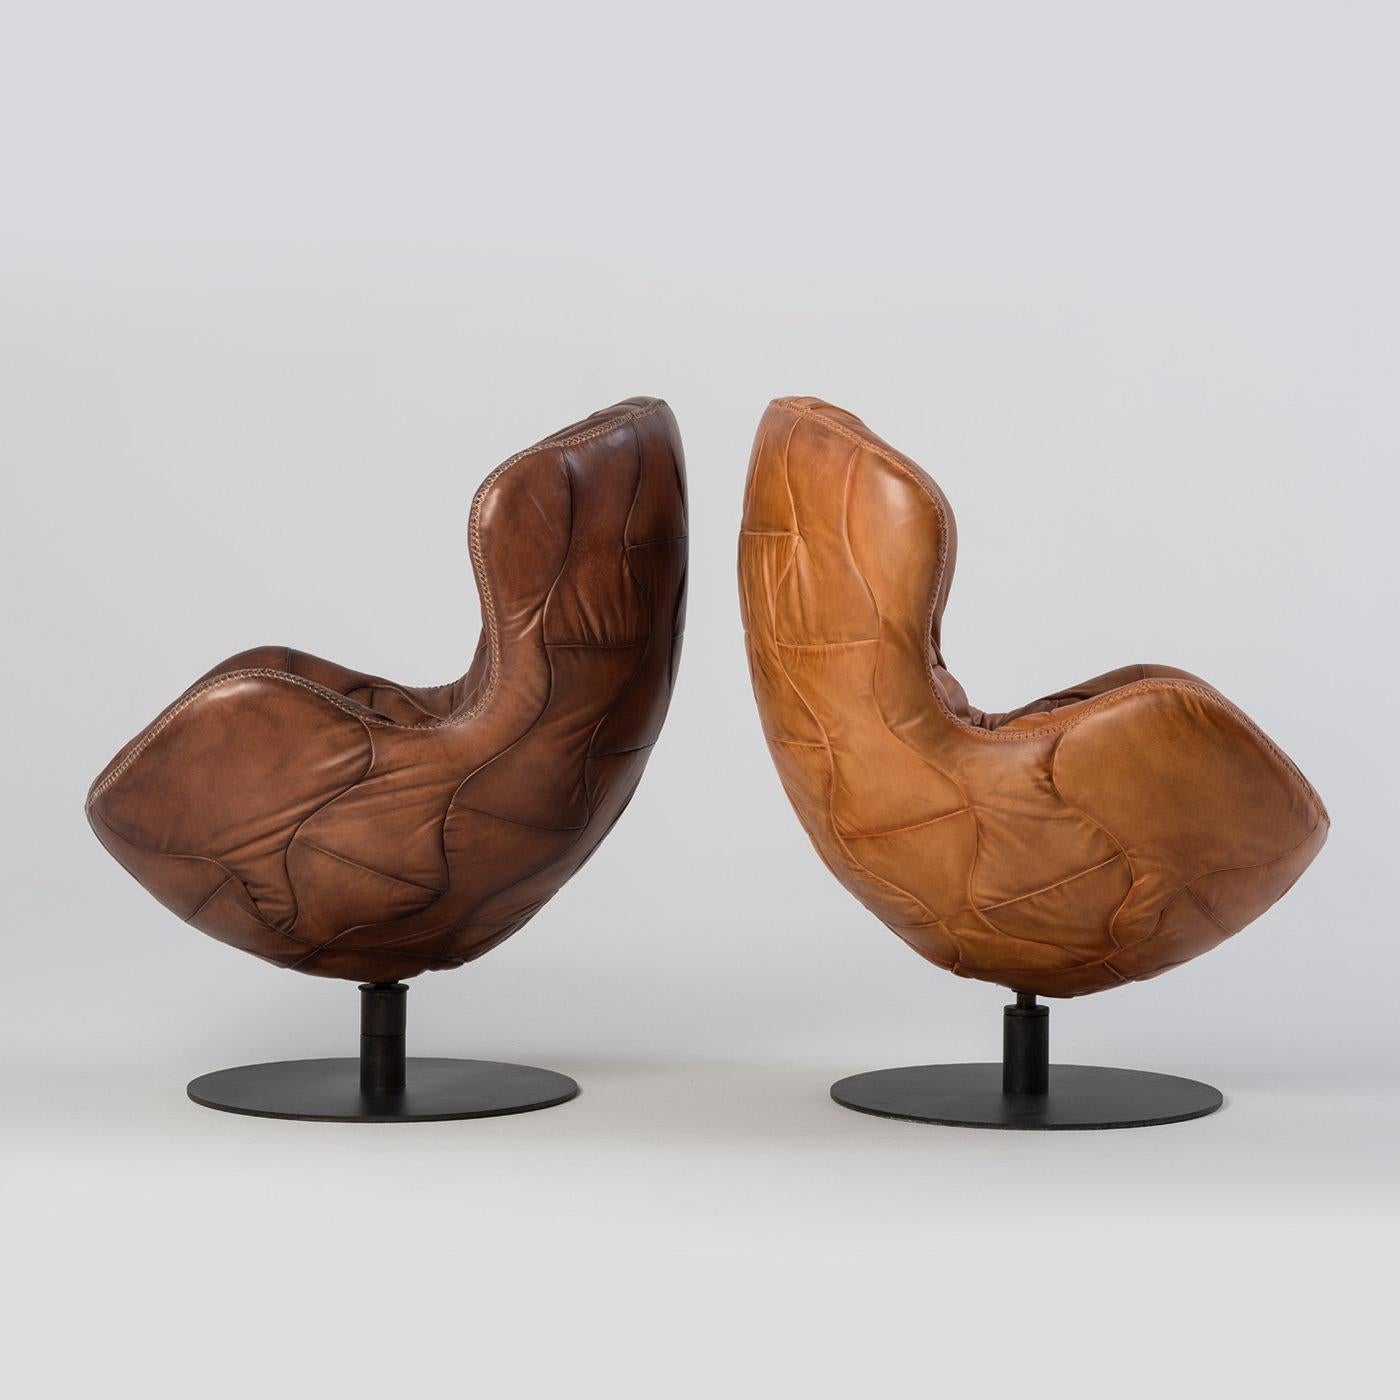 Hand-Crafted Pelè Armchair Tribeca Collection by Marco and Giulio Mantellassi For Sale